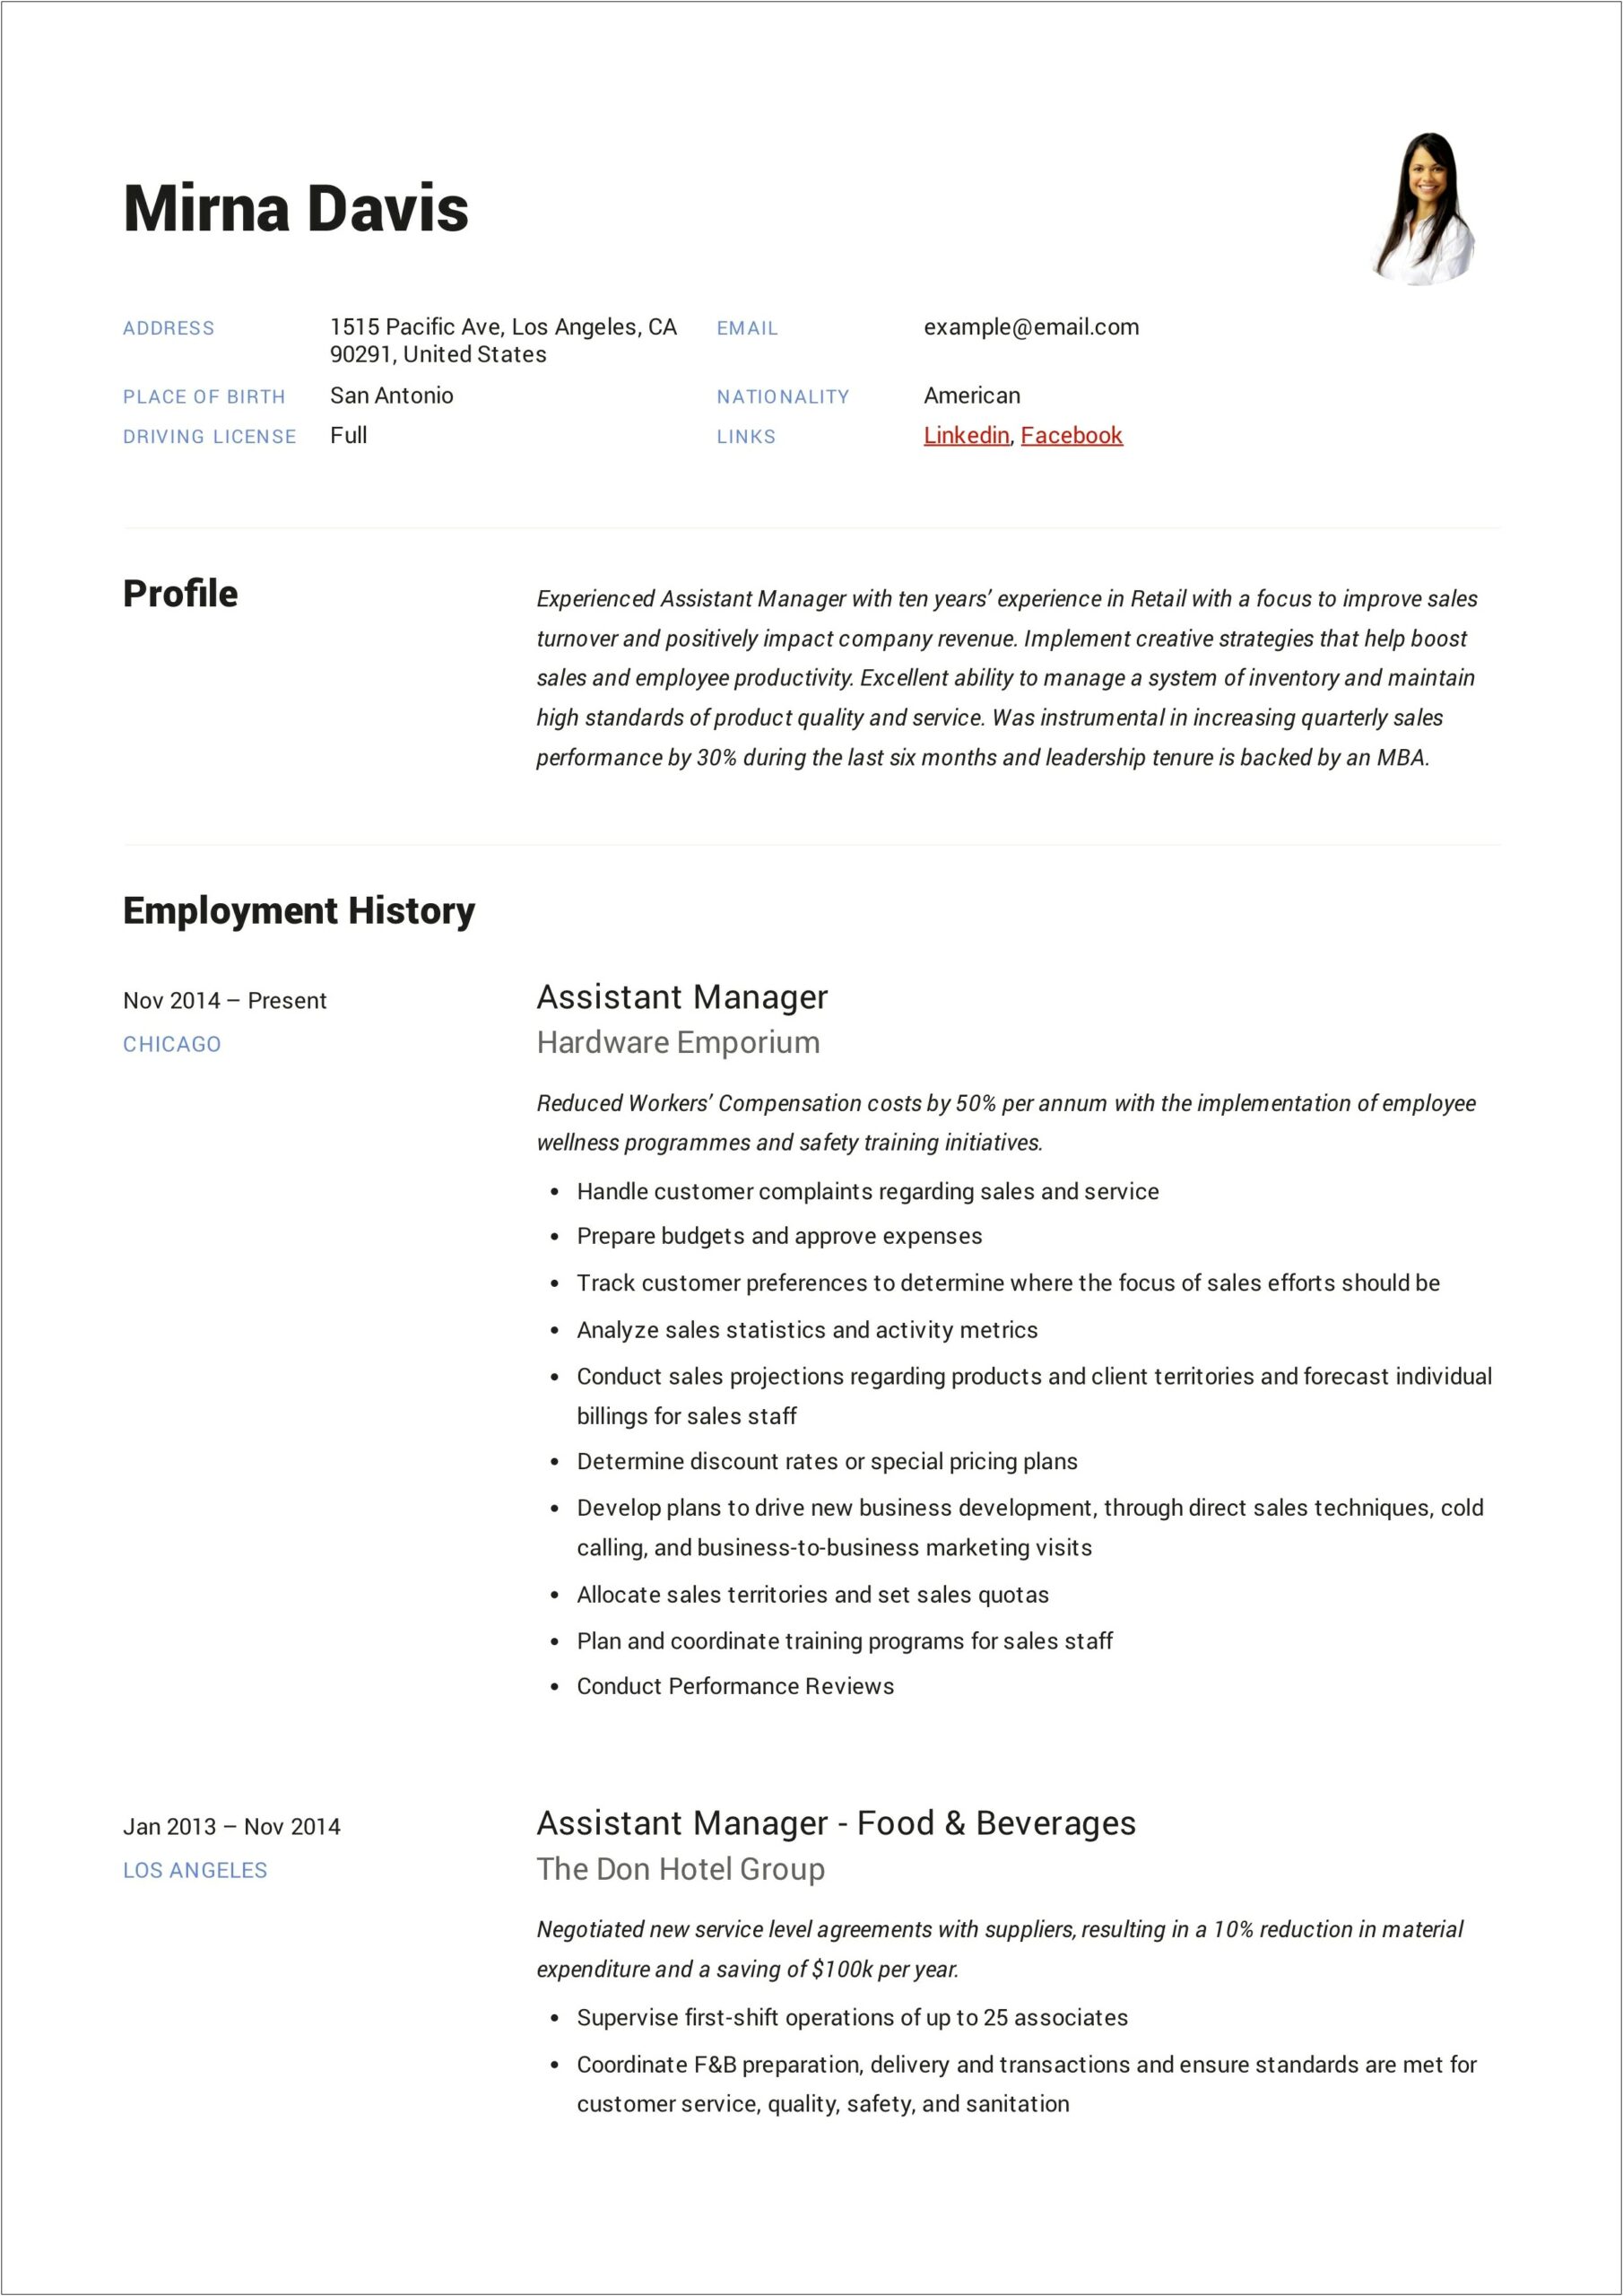 Sample Resume For Assistant Manager Training